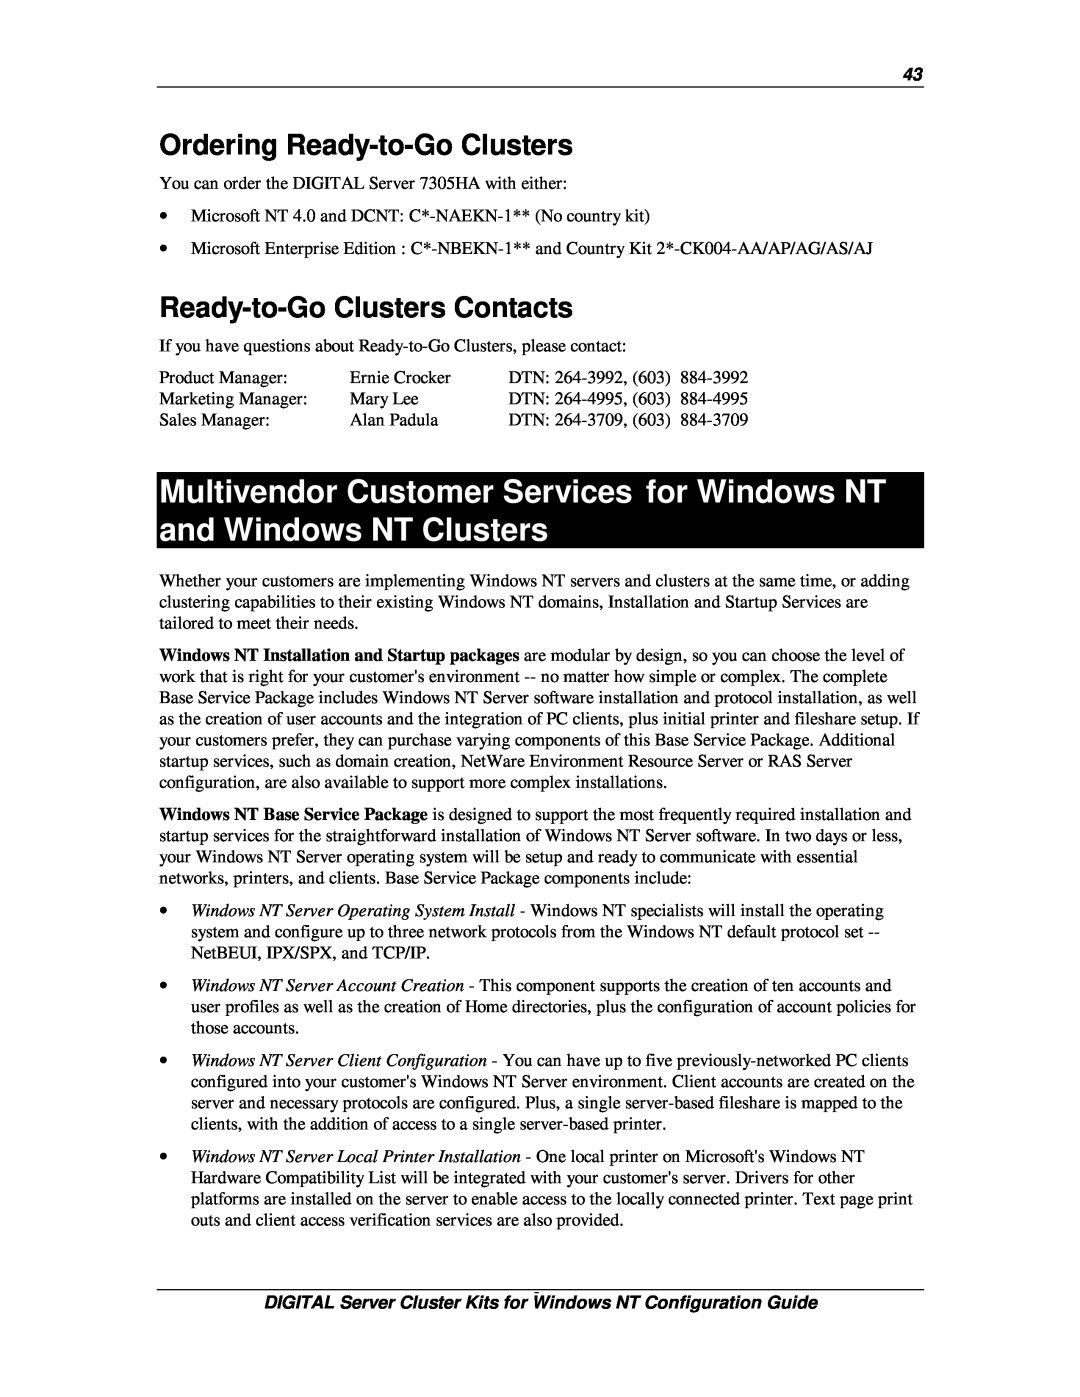 Compaq DIGITAL Server Cluster Kits for Windows NT Multivendor Customer Services for Windows NT and Windows NT Clusters 